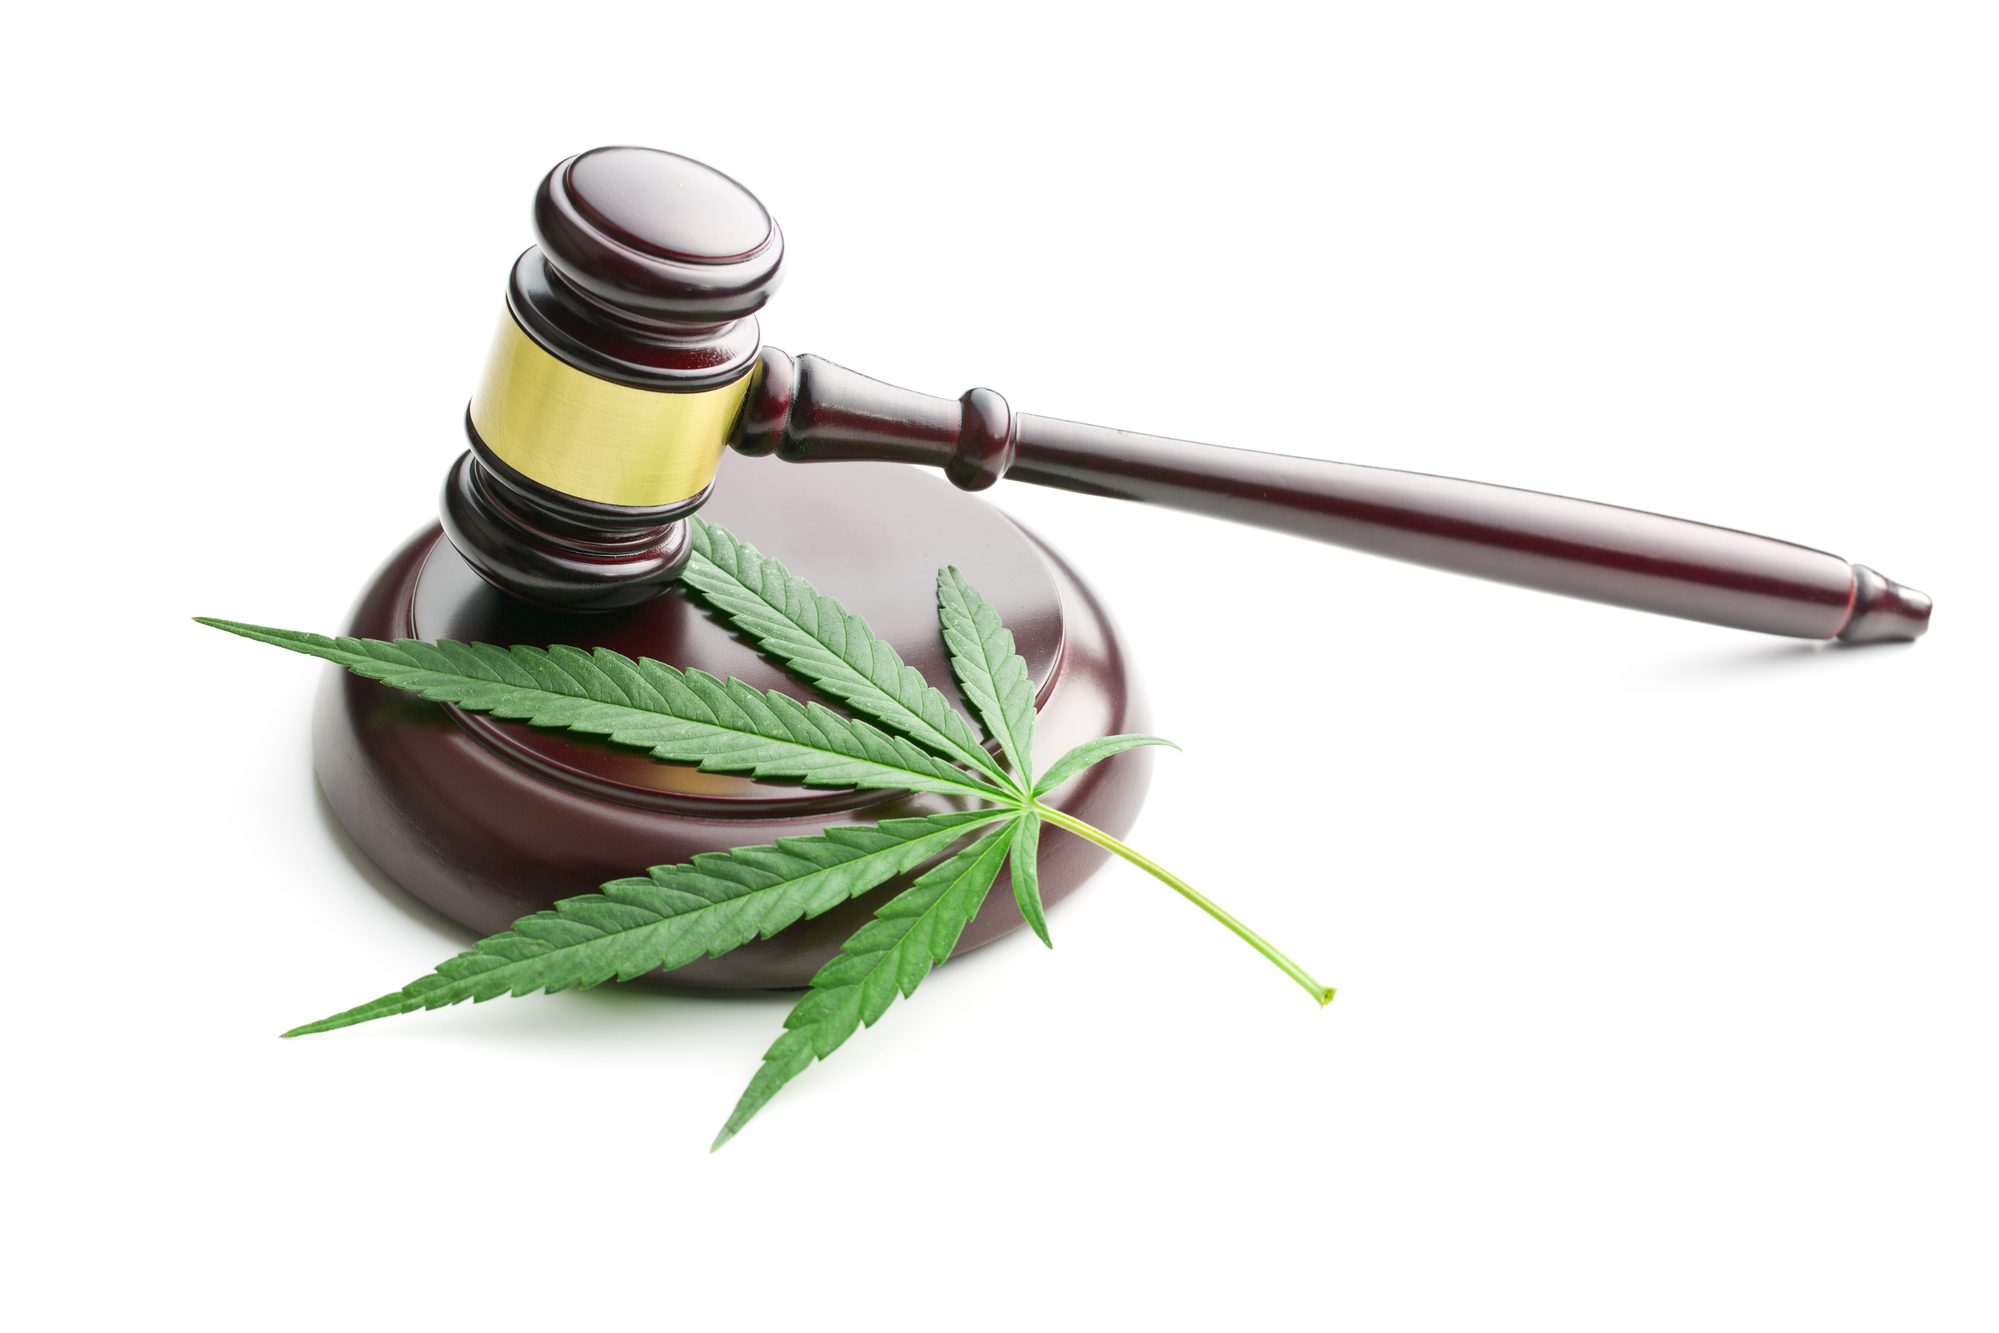 Revising Your Drug Policy for Marijuana